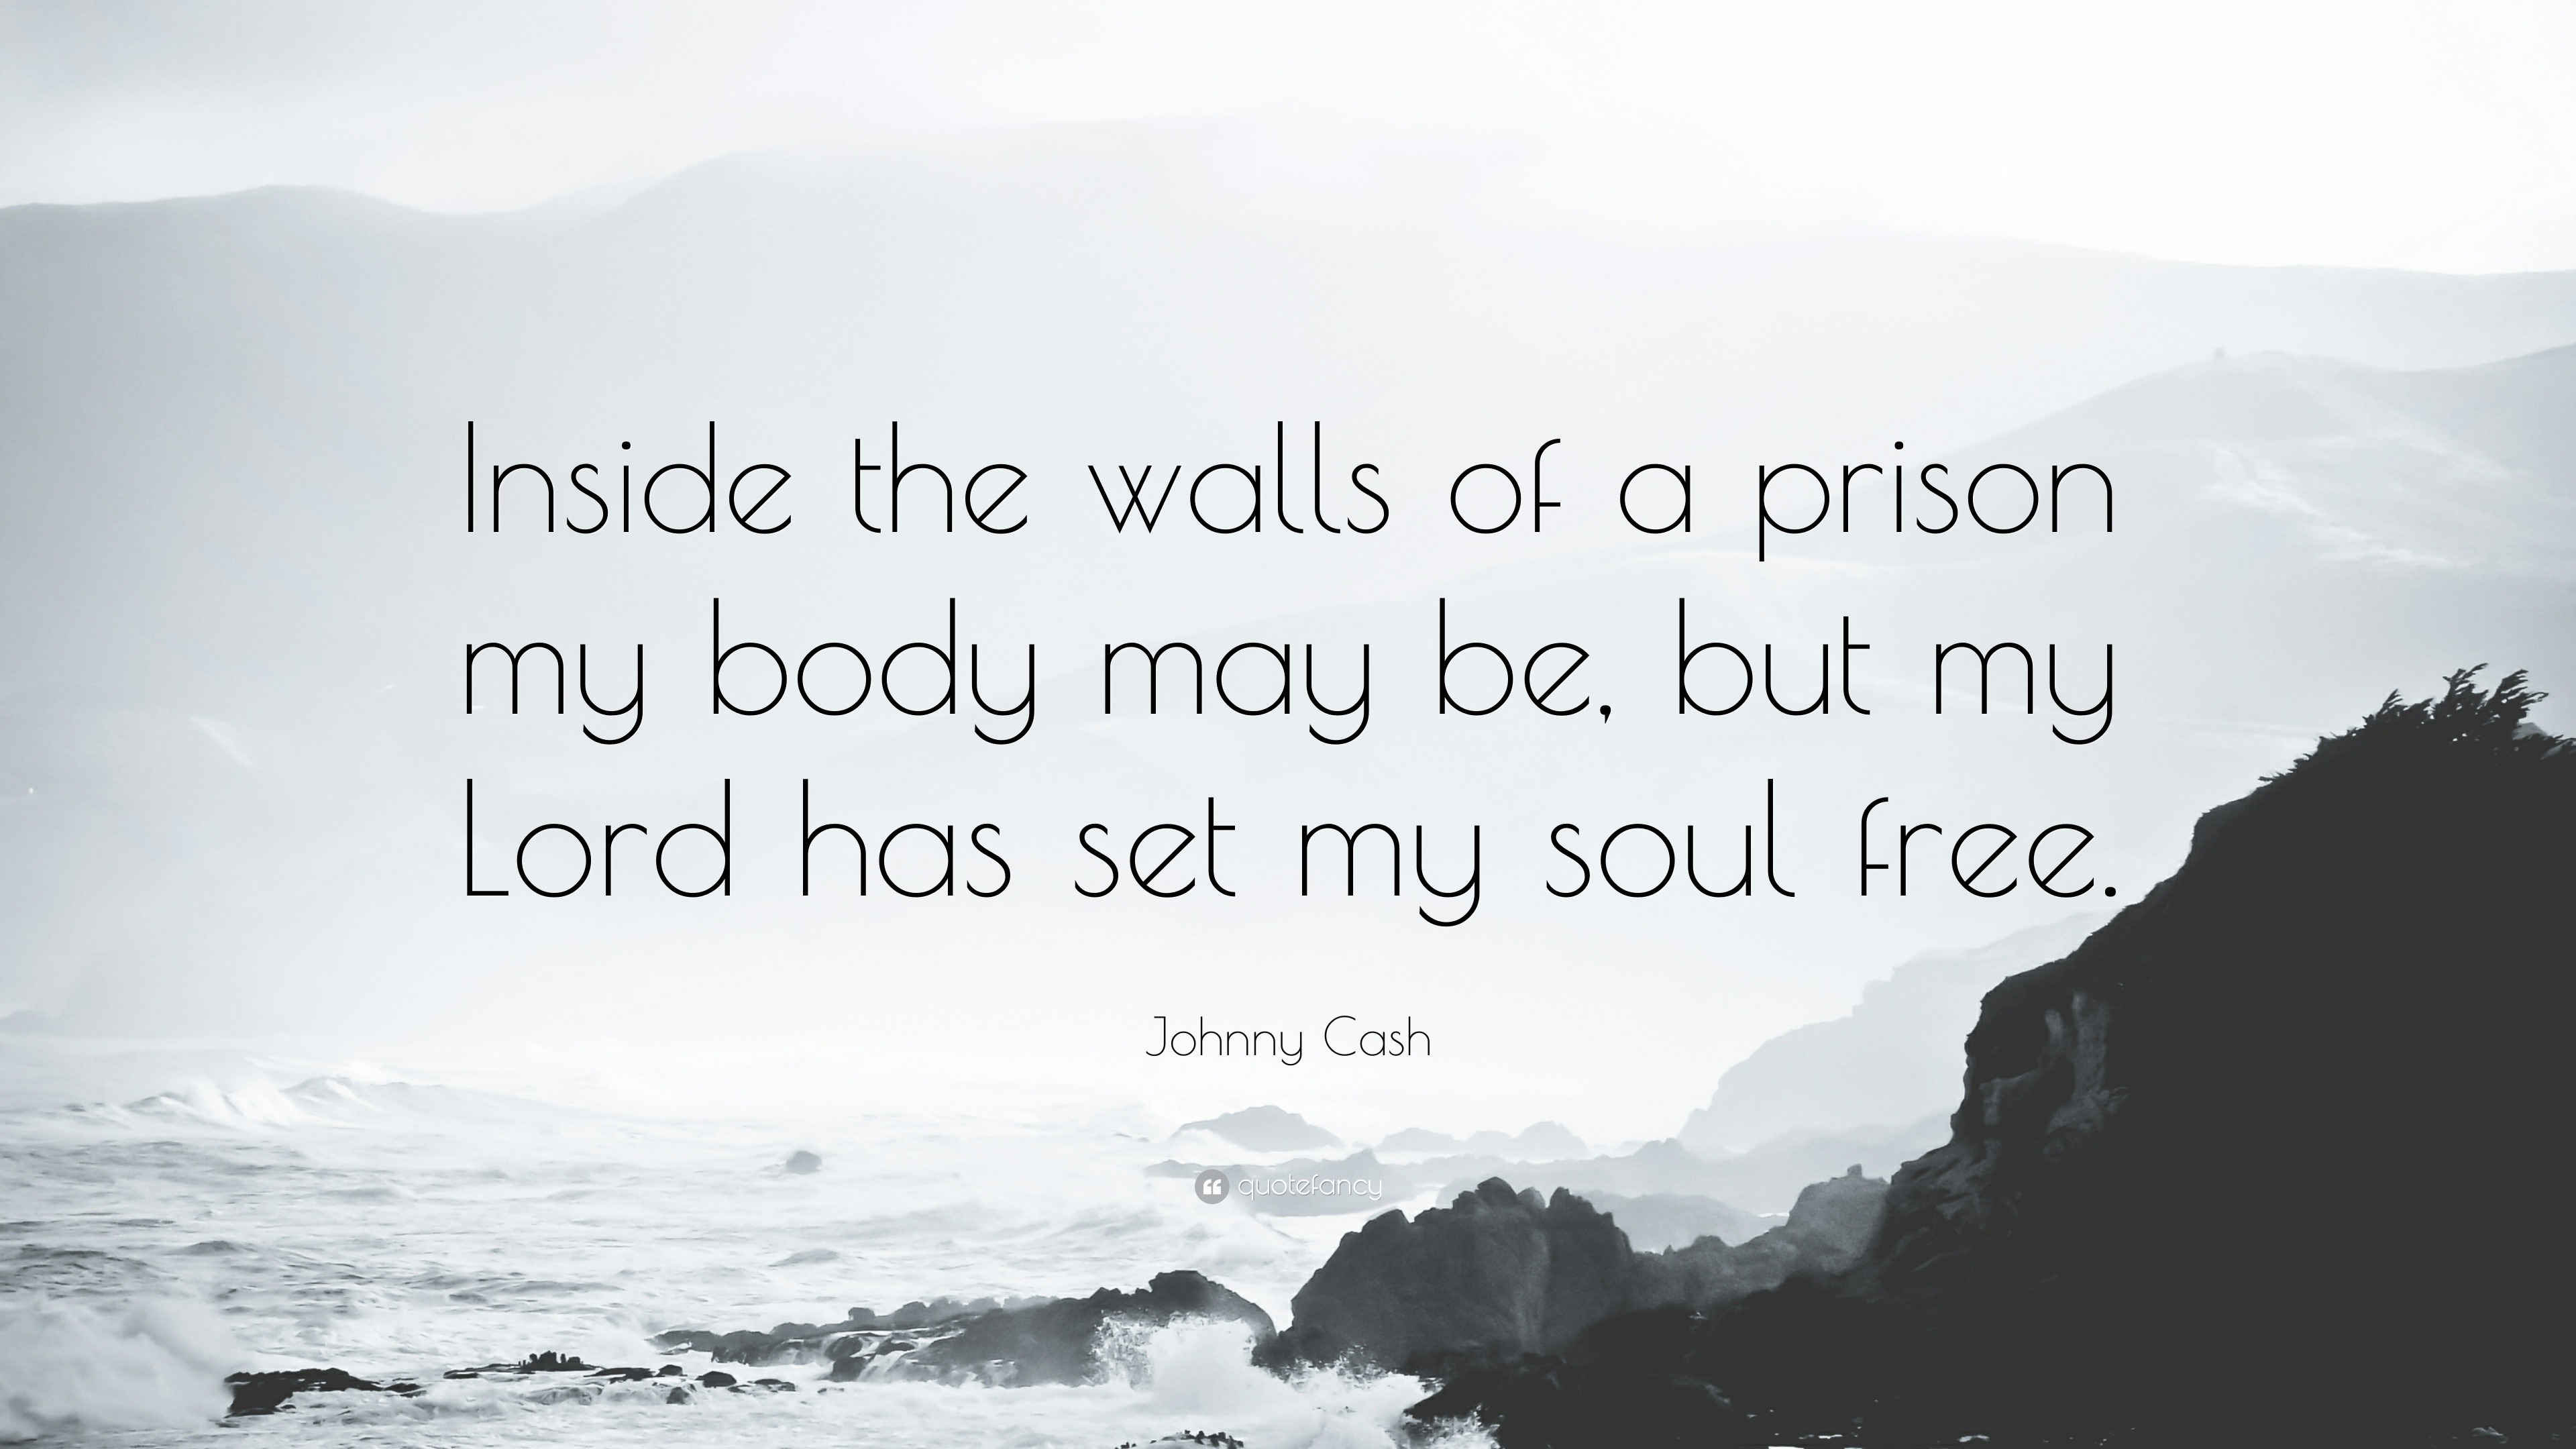 Johnny Cash Quote: "Inside the walls of a prison my body may be, but my Lord has set my soul ...